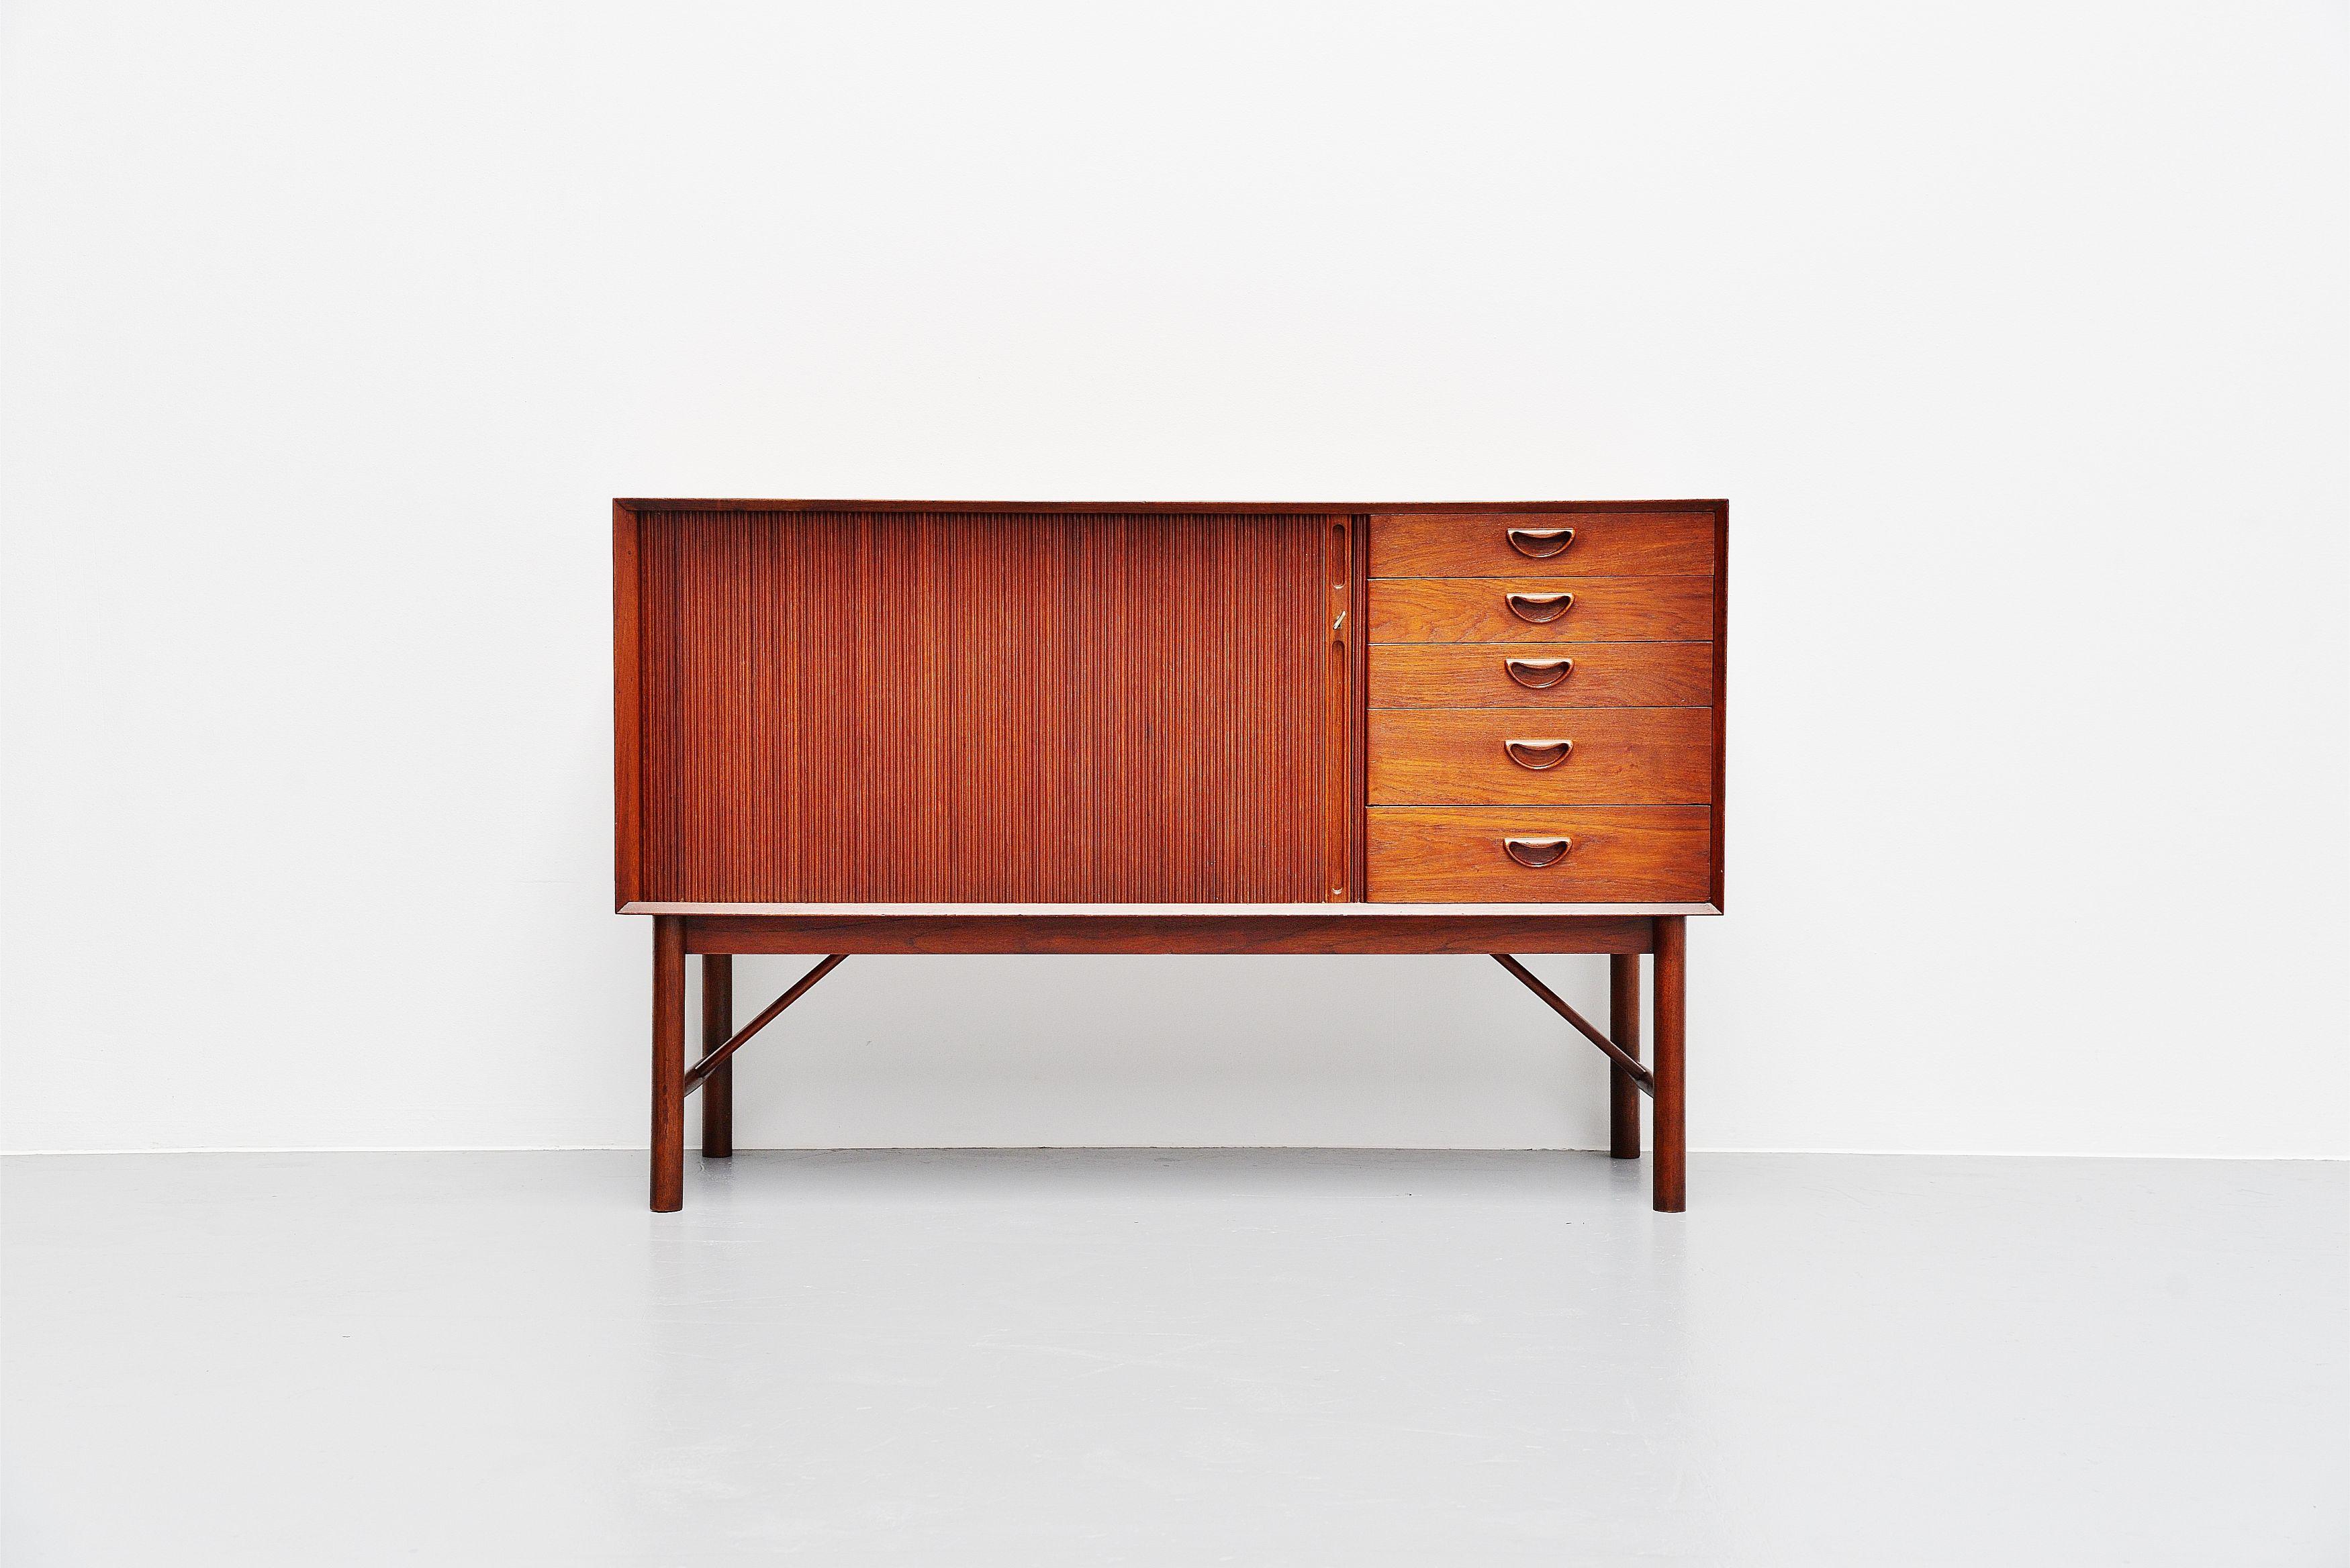 Super finished small sideboard designed by Peter Hvidt and Orla Molgaard Nielsen and manufactured by Soborg Mobler, Denmark, 1958. The cabinet has a long tambour door on the left and 5 drawers on the right. The cabinet is made of solid teak wood and